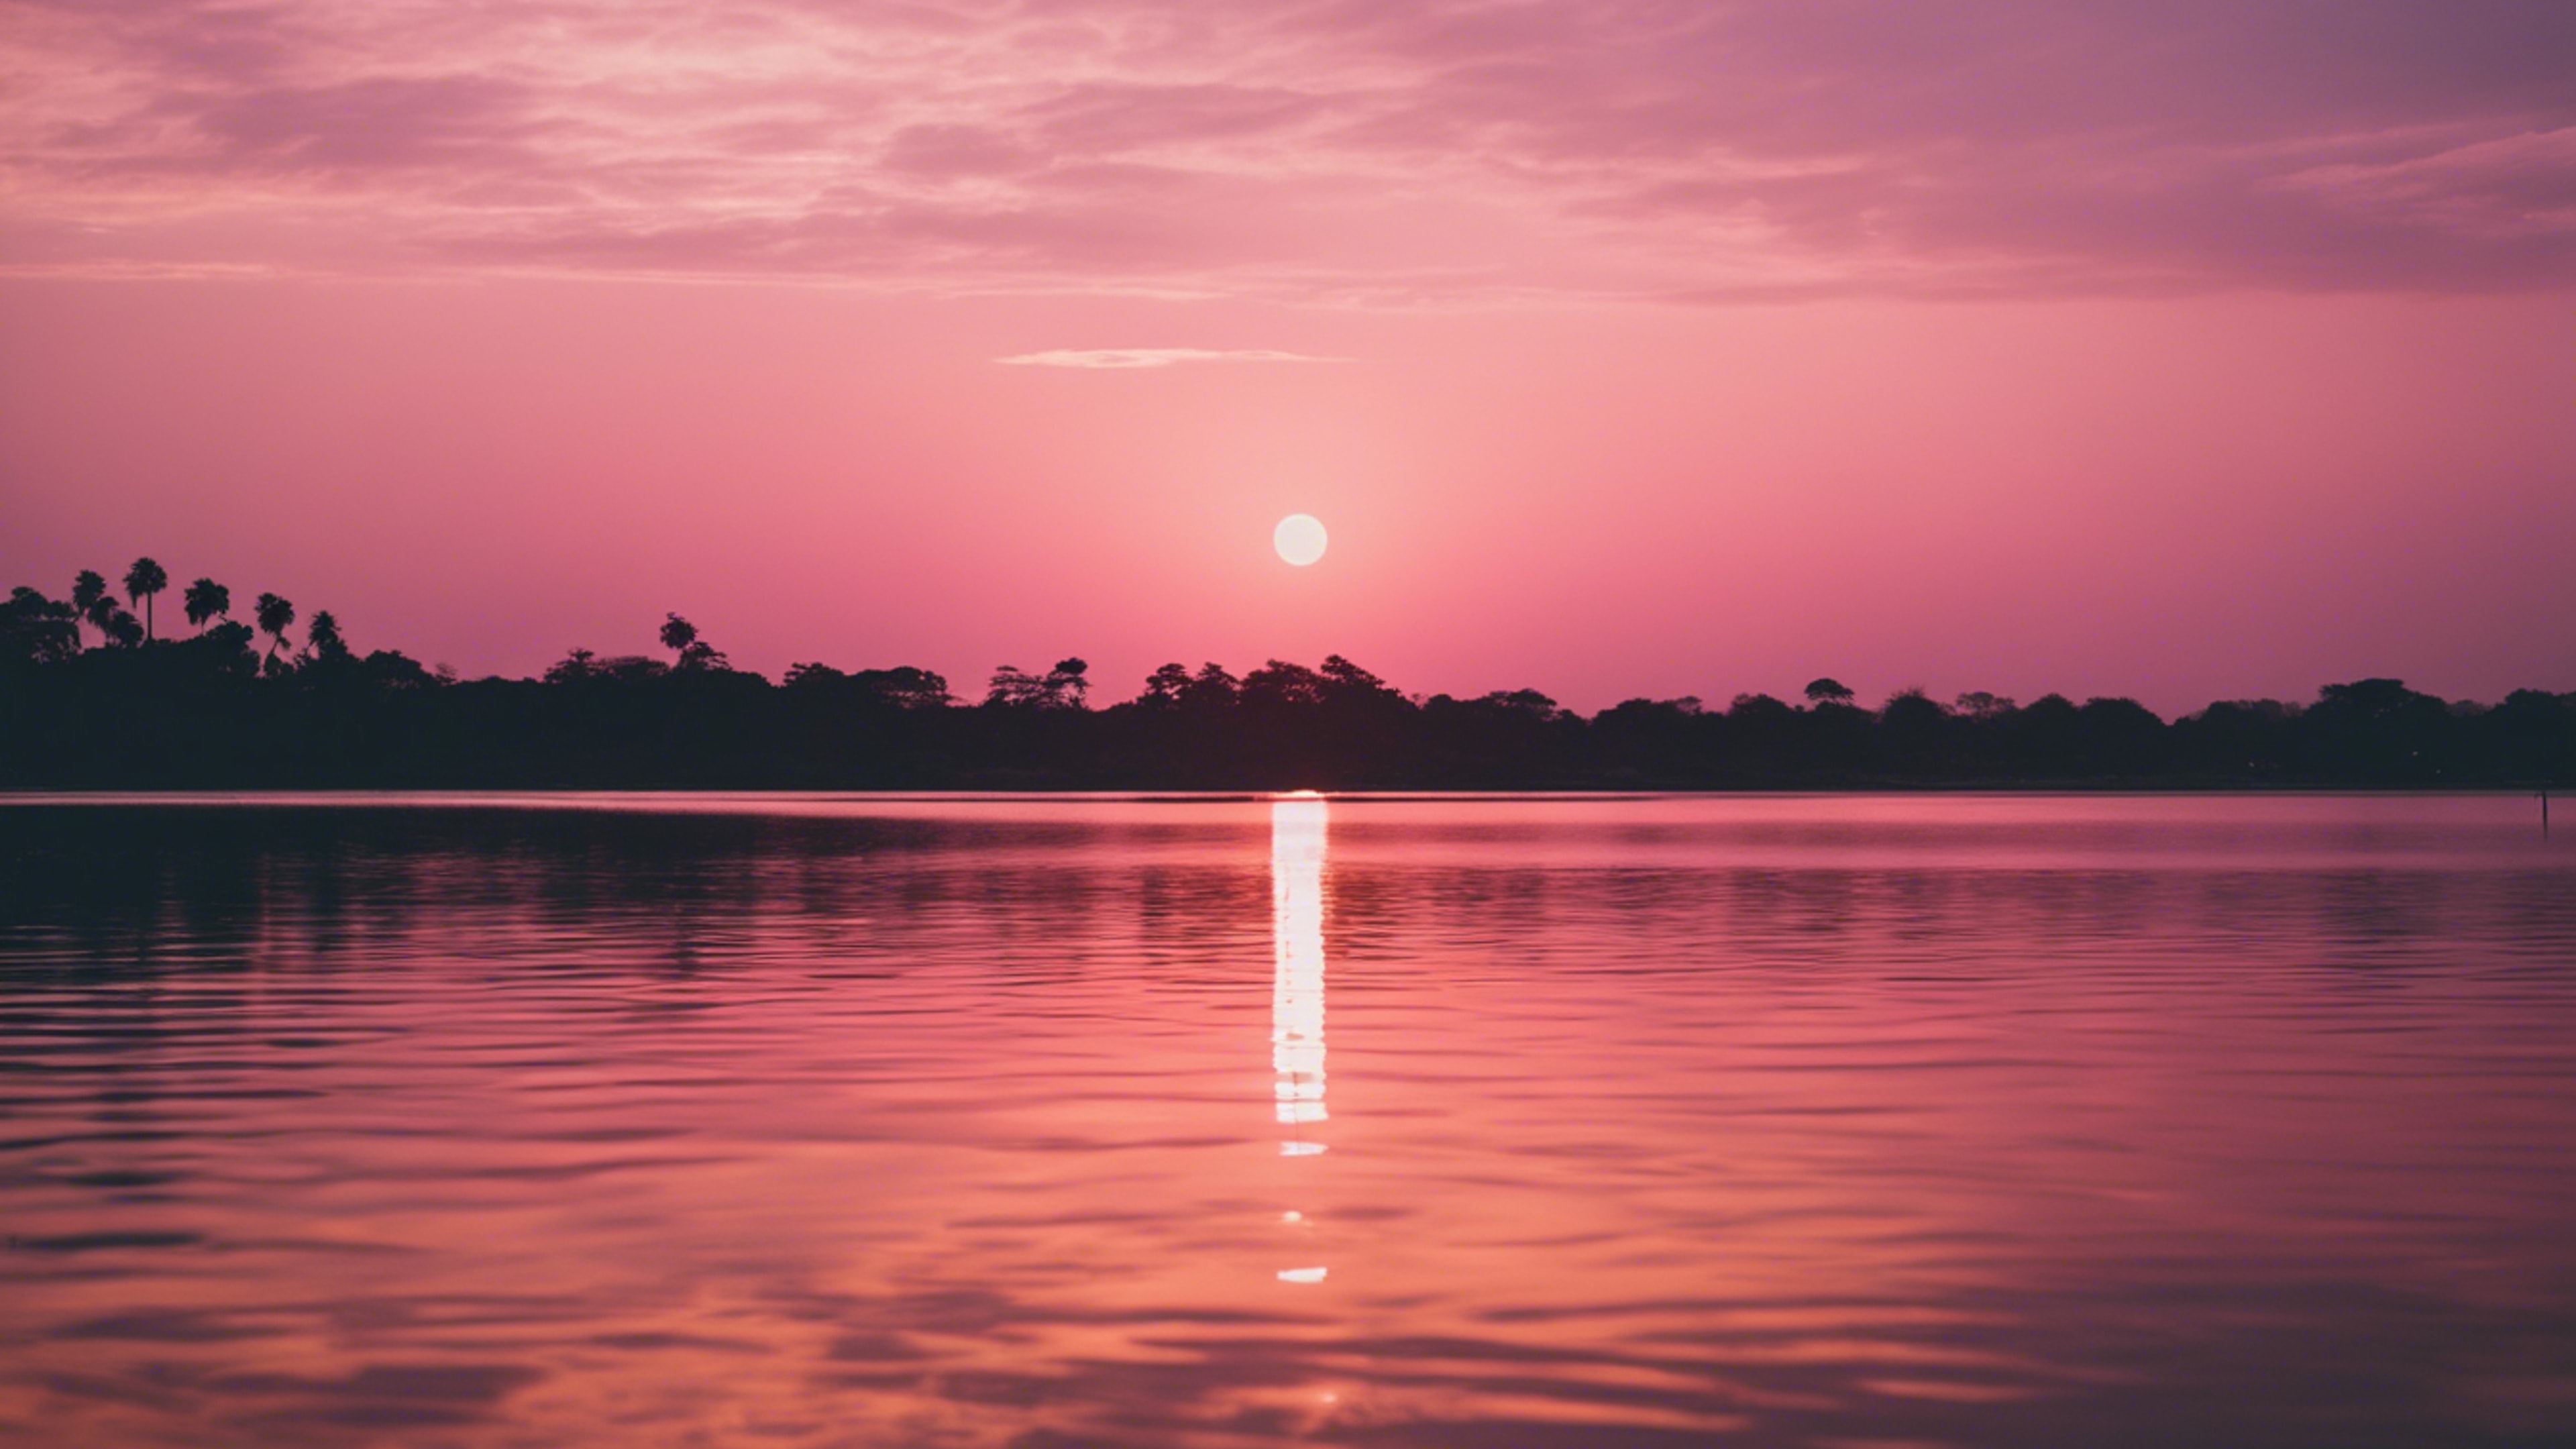 A picturesque pink and gold sunset reflecting on tranquil lagoon waters. Tapeta[938883e46b5847a4931b]